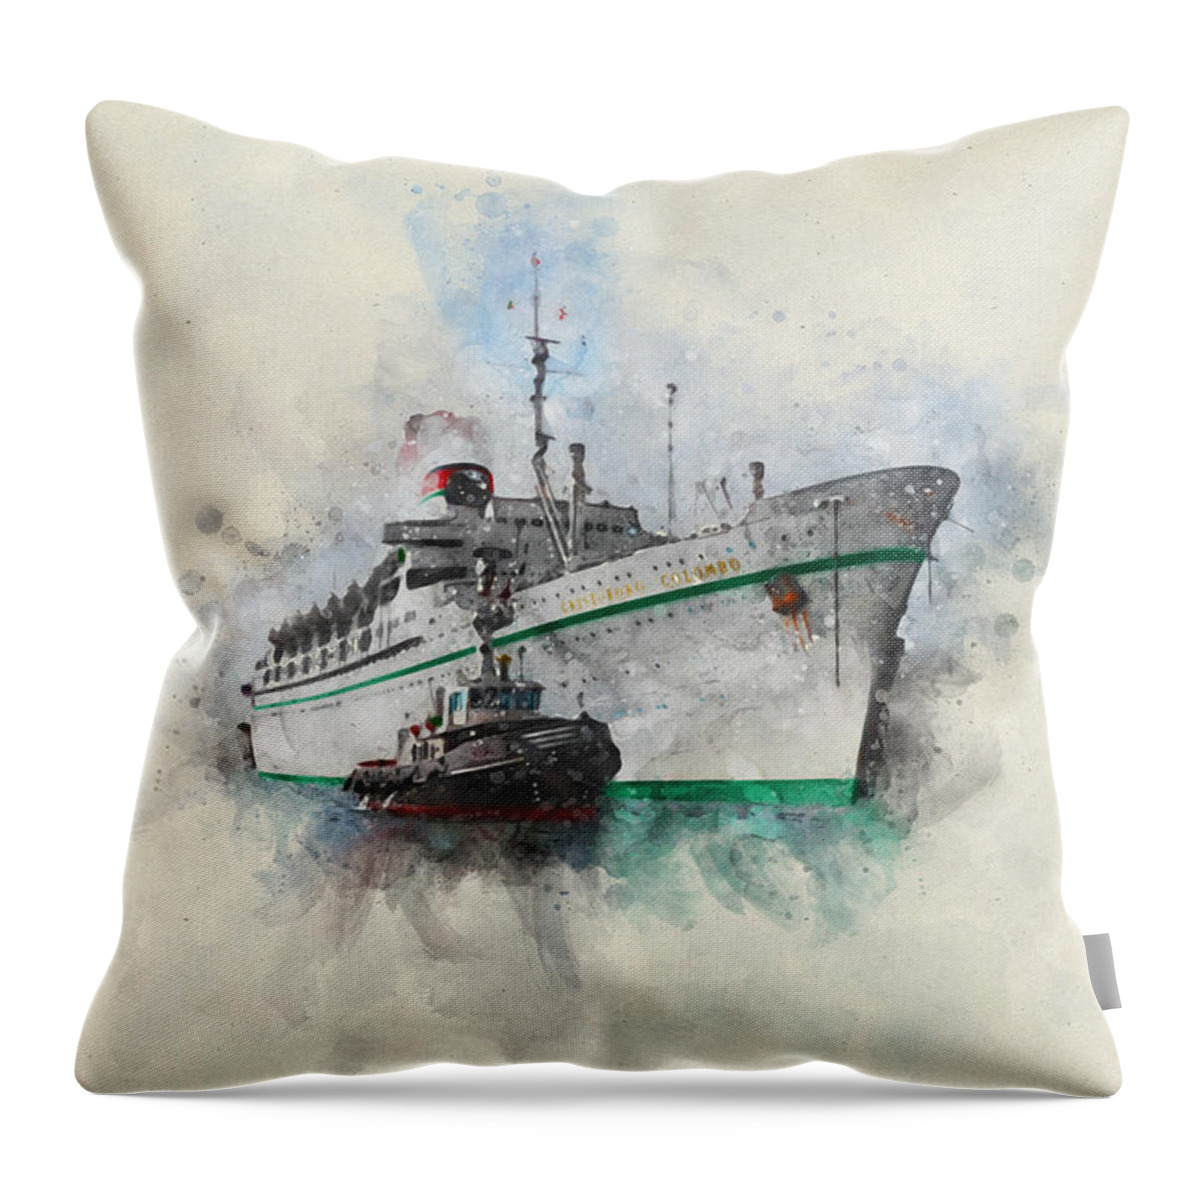 Steamer Throw Pillow featuring the digital art S.S. Cristoforo Colombo by Geir Rosset